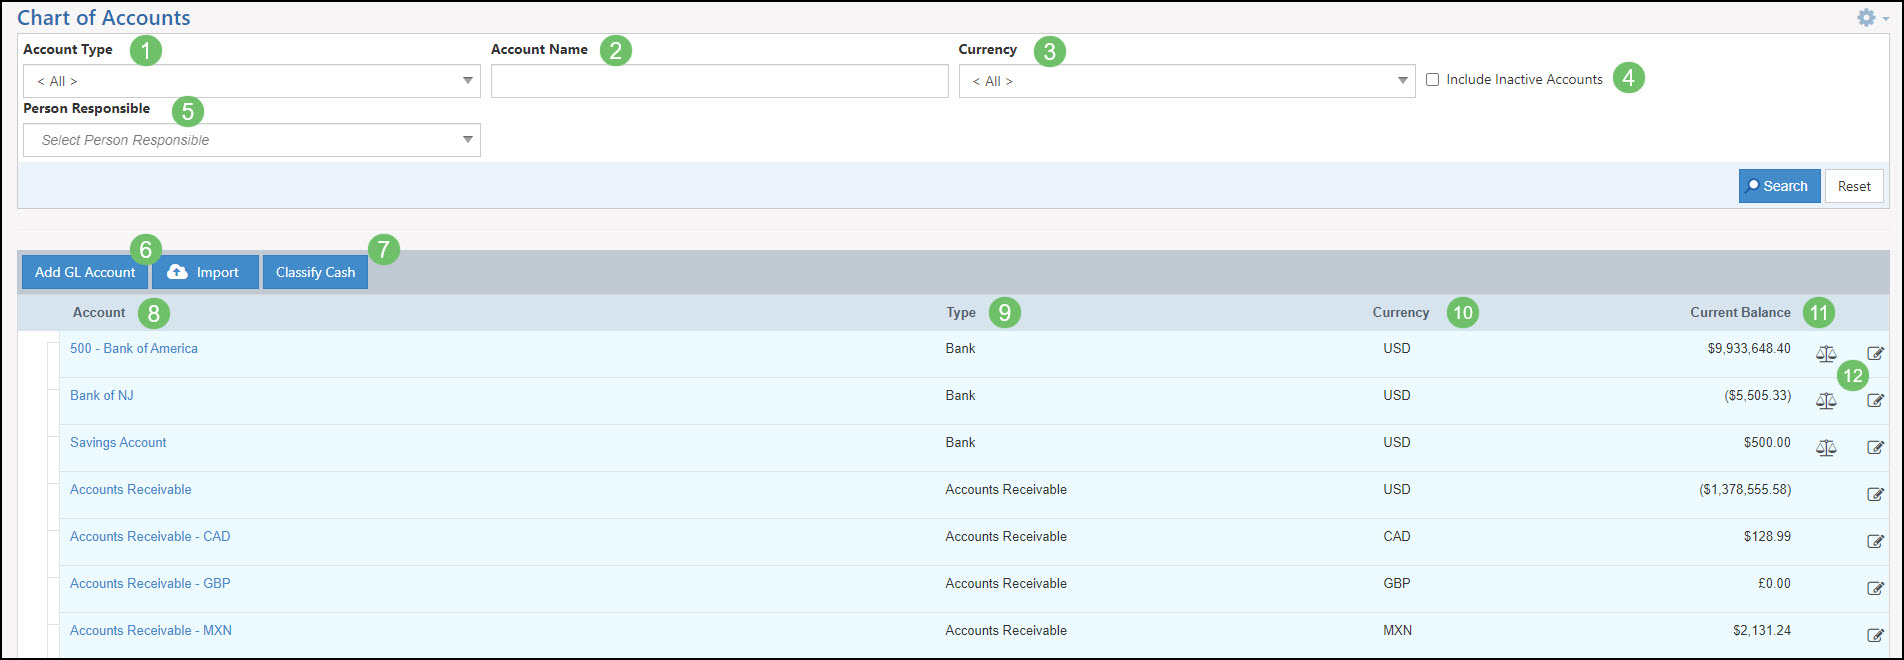 Image of the Chart of Accounts page within Striven